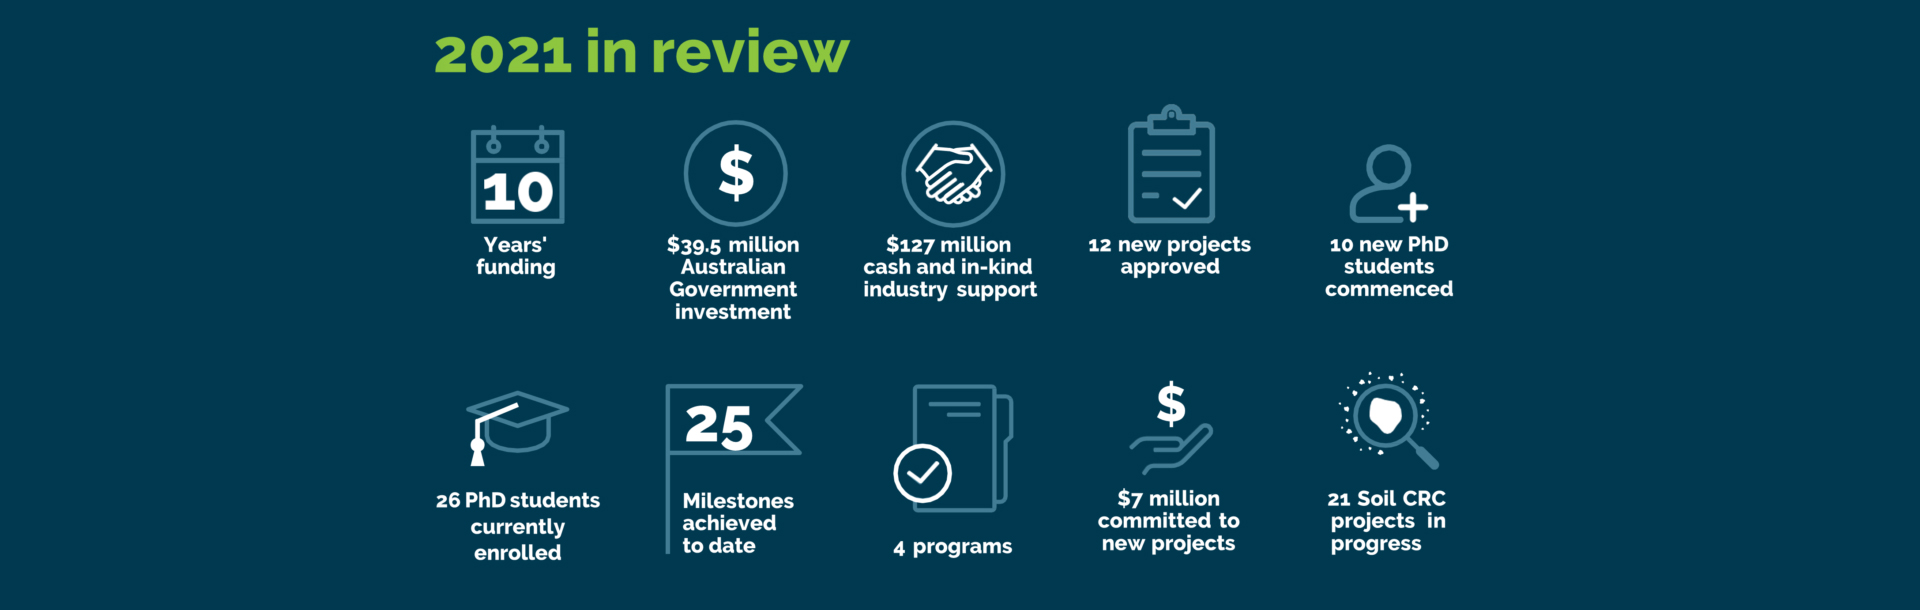 Year-in-Review-2021-Infographic